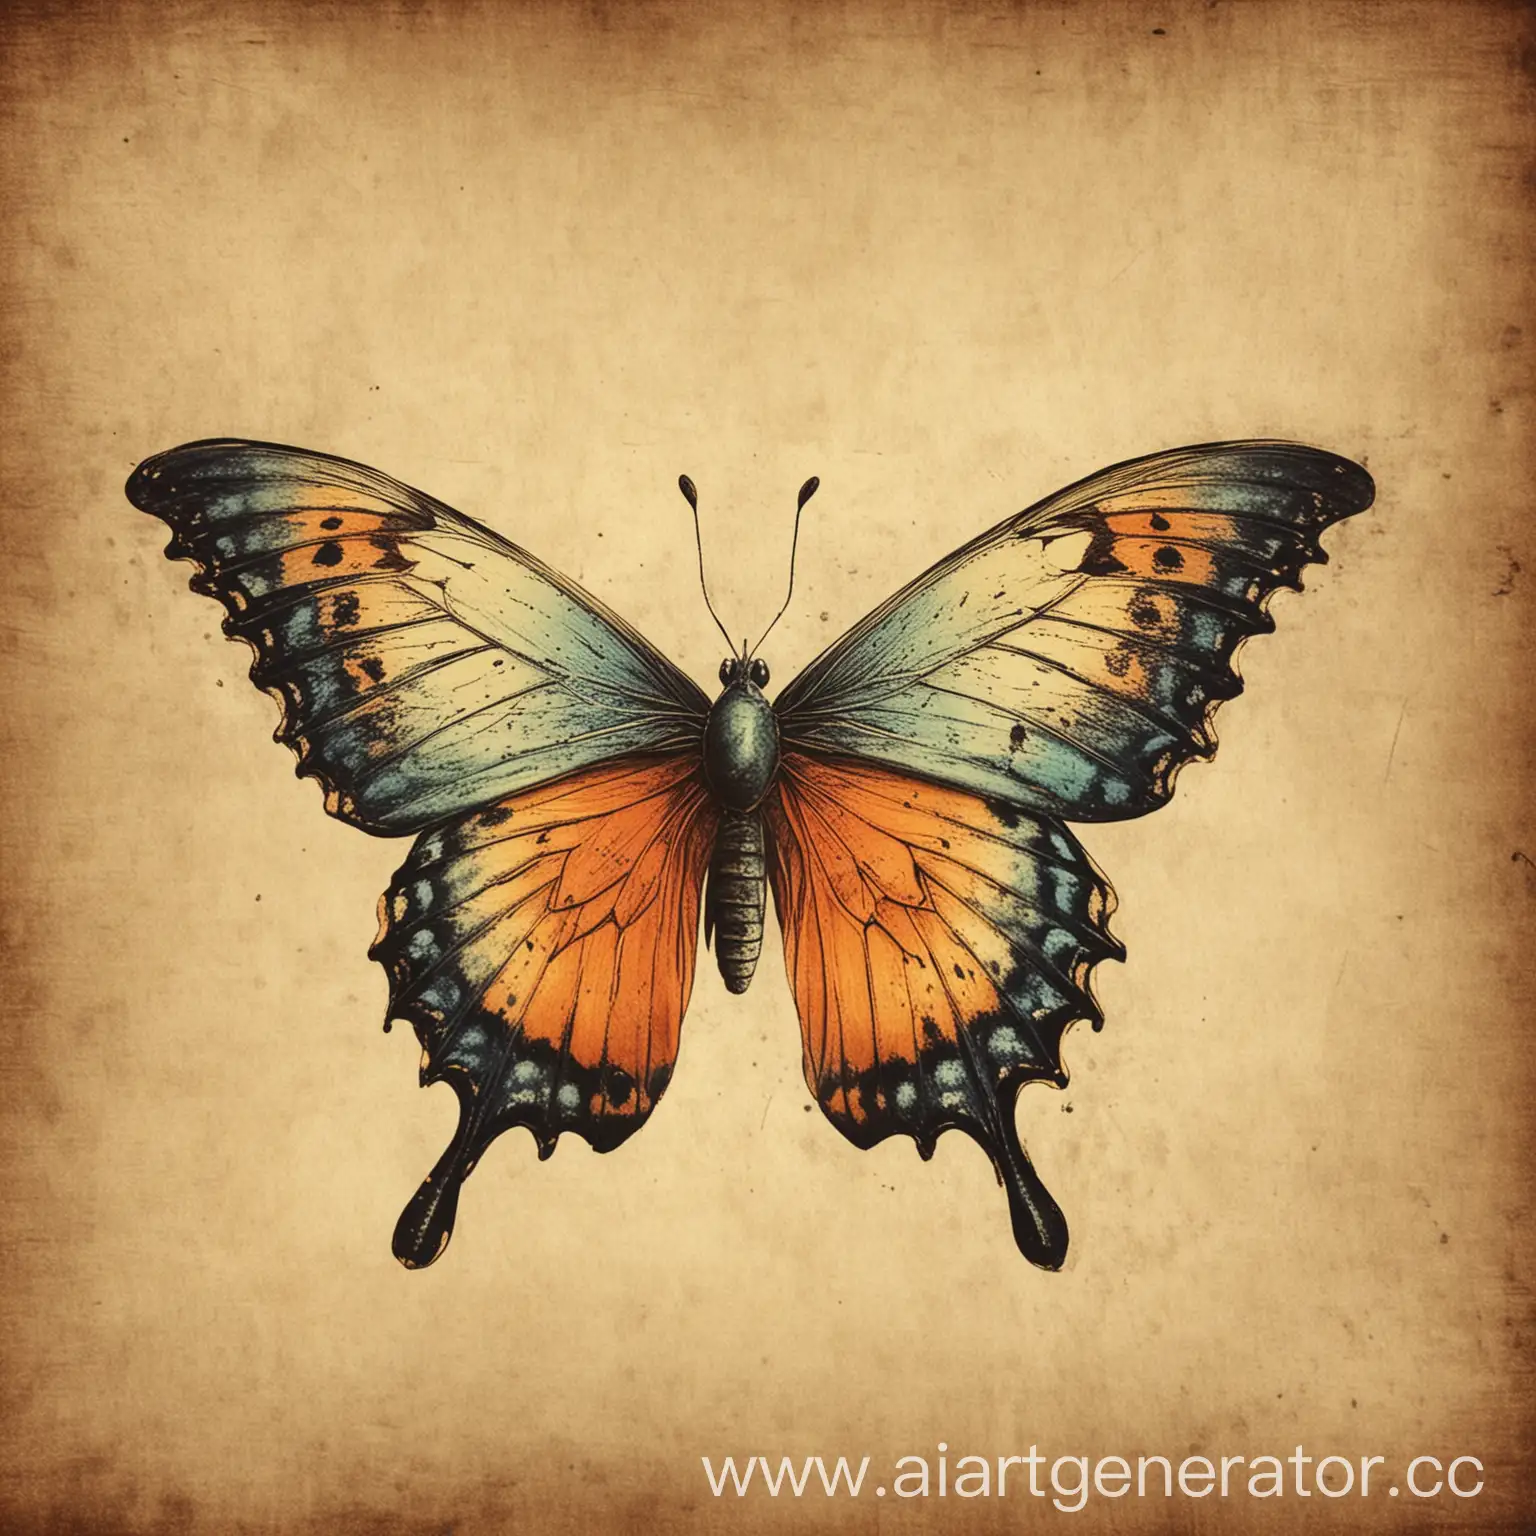 Vintage-Style-Illustration-of-a-Swallowtail-Butterfly-Wing